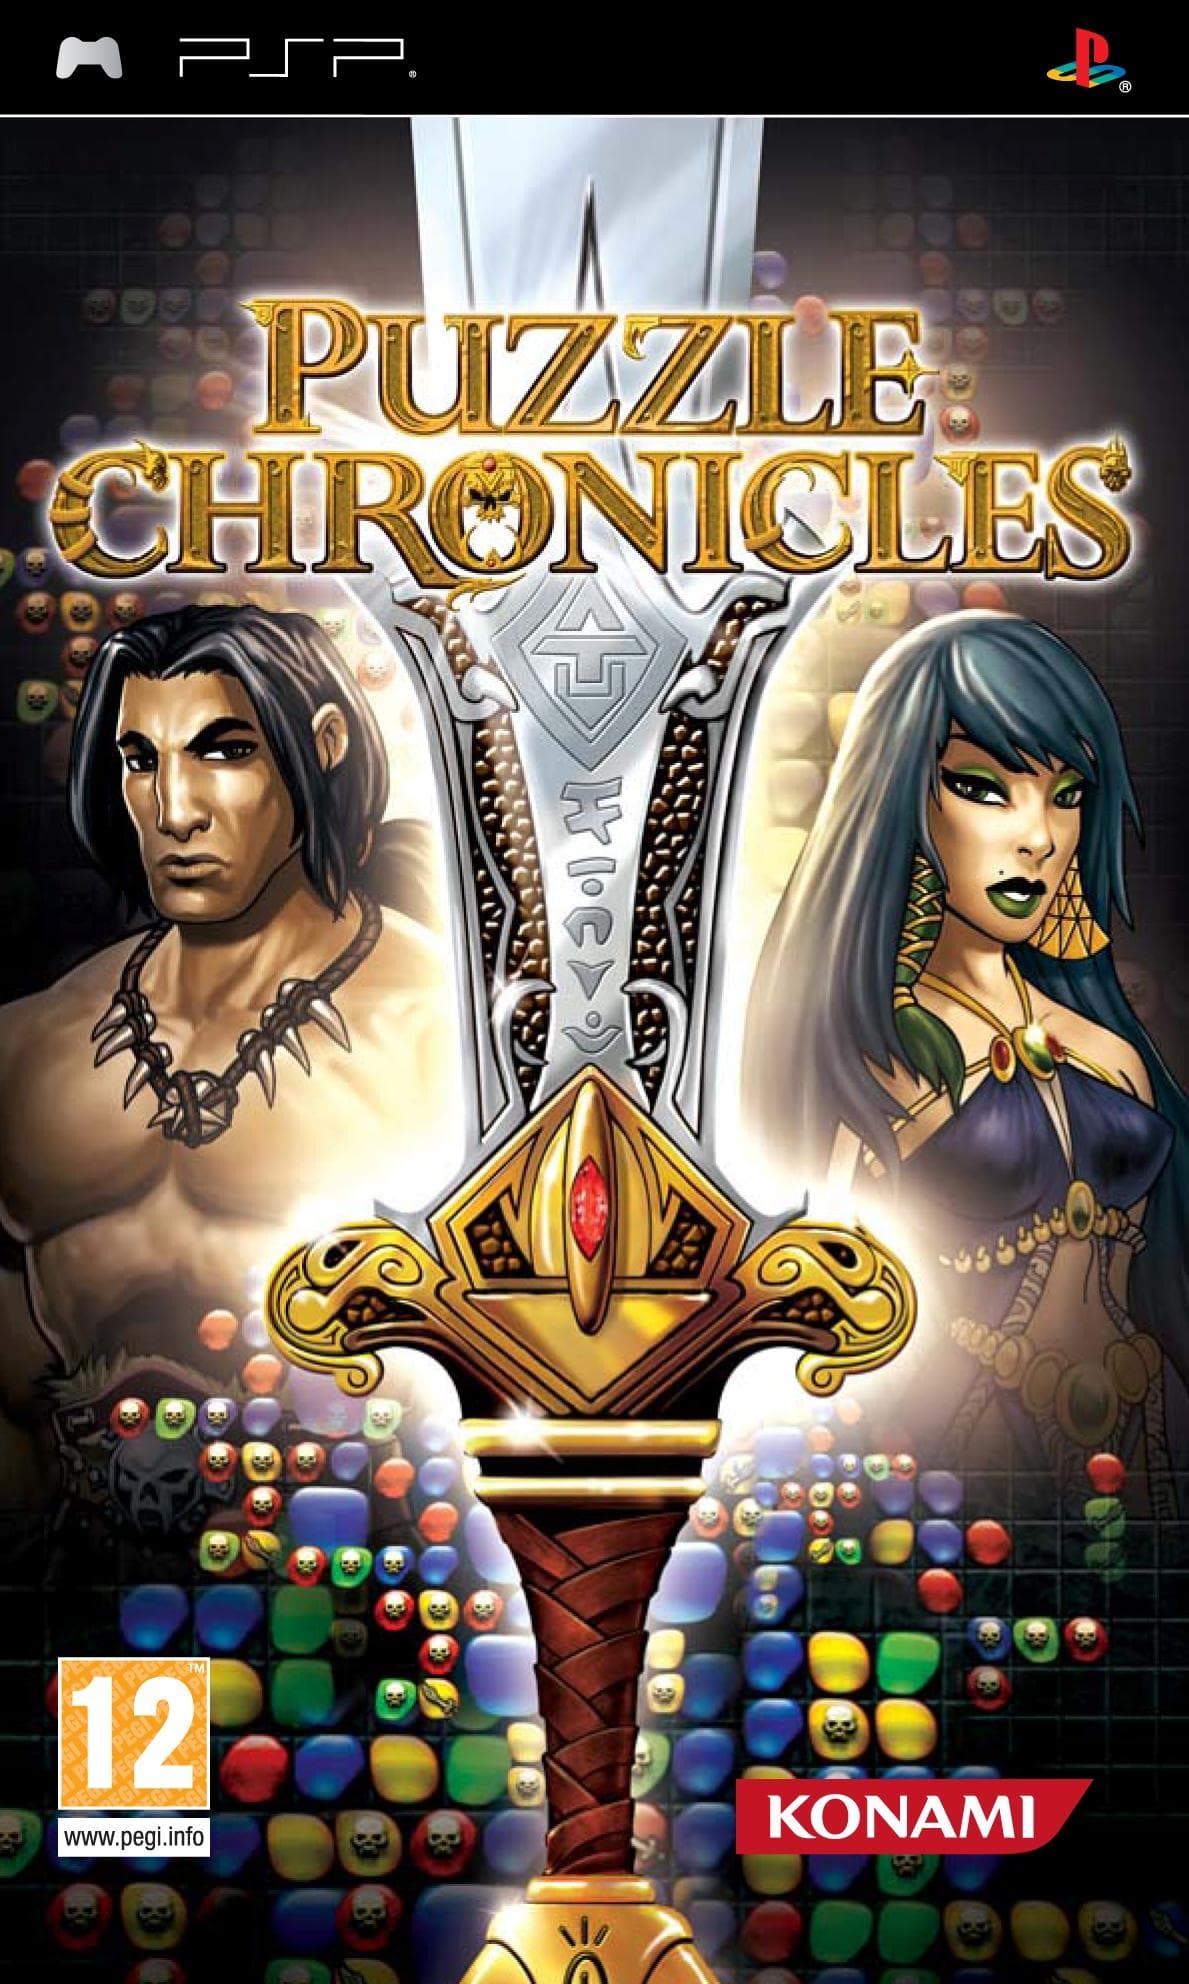 Puzzle Chronicles psp download